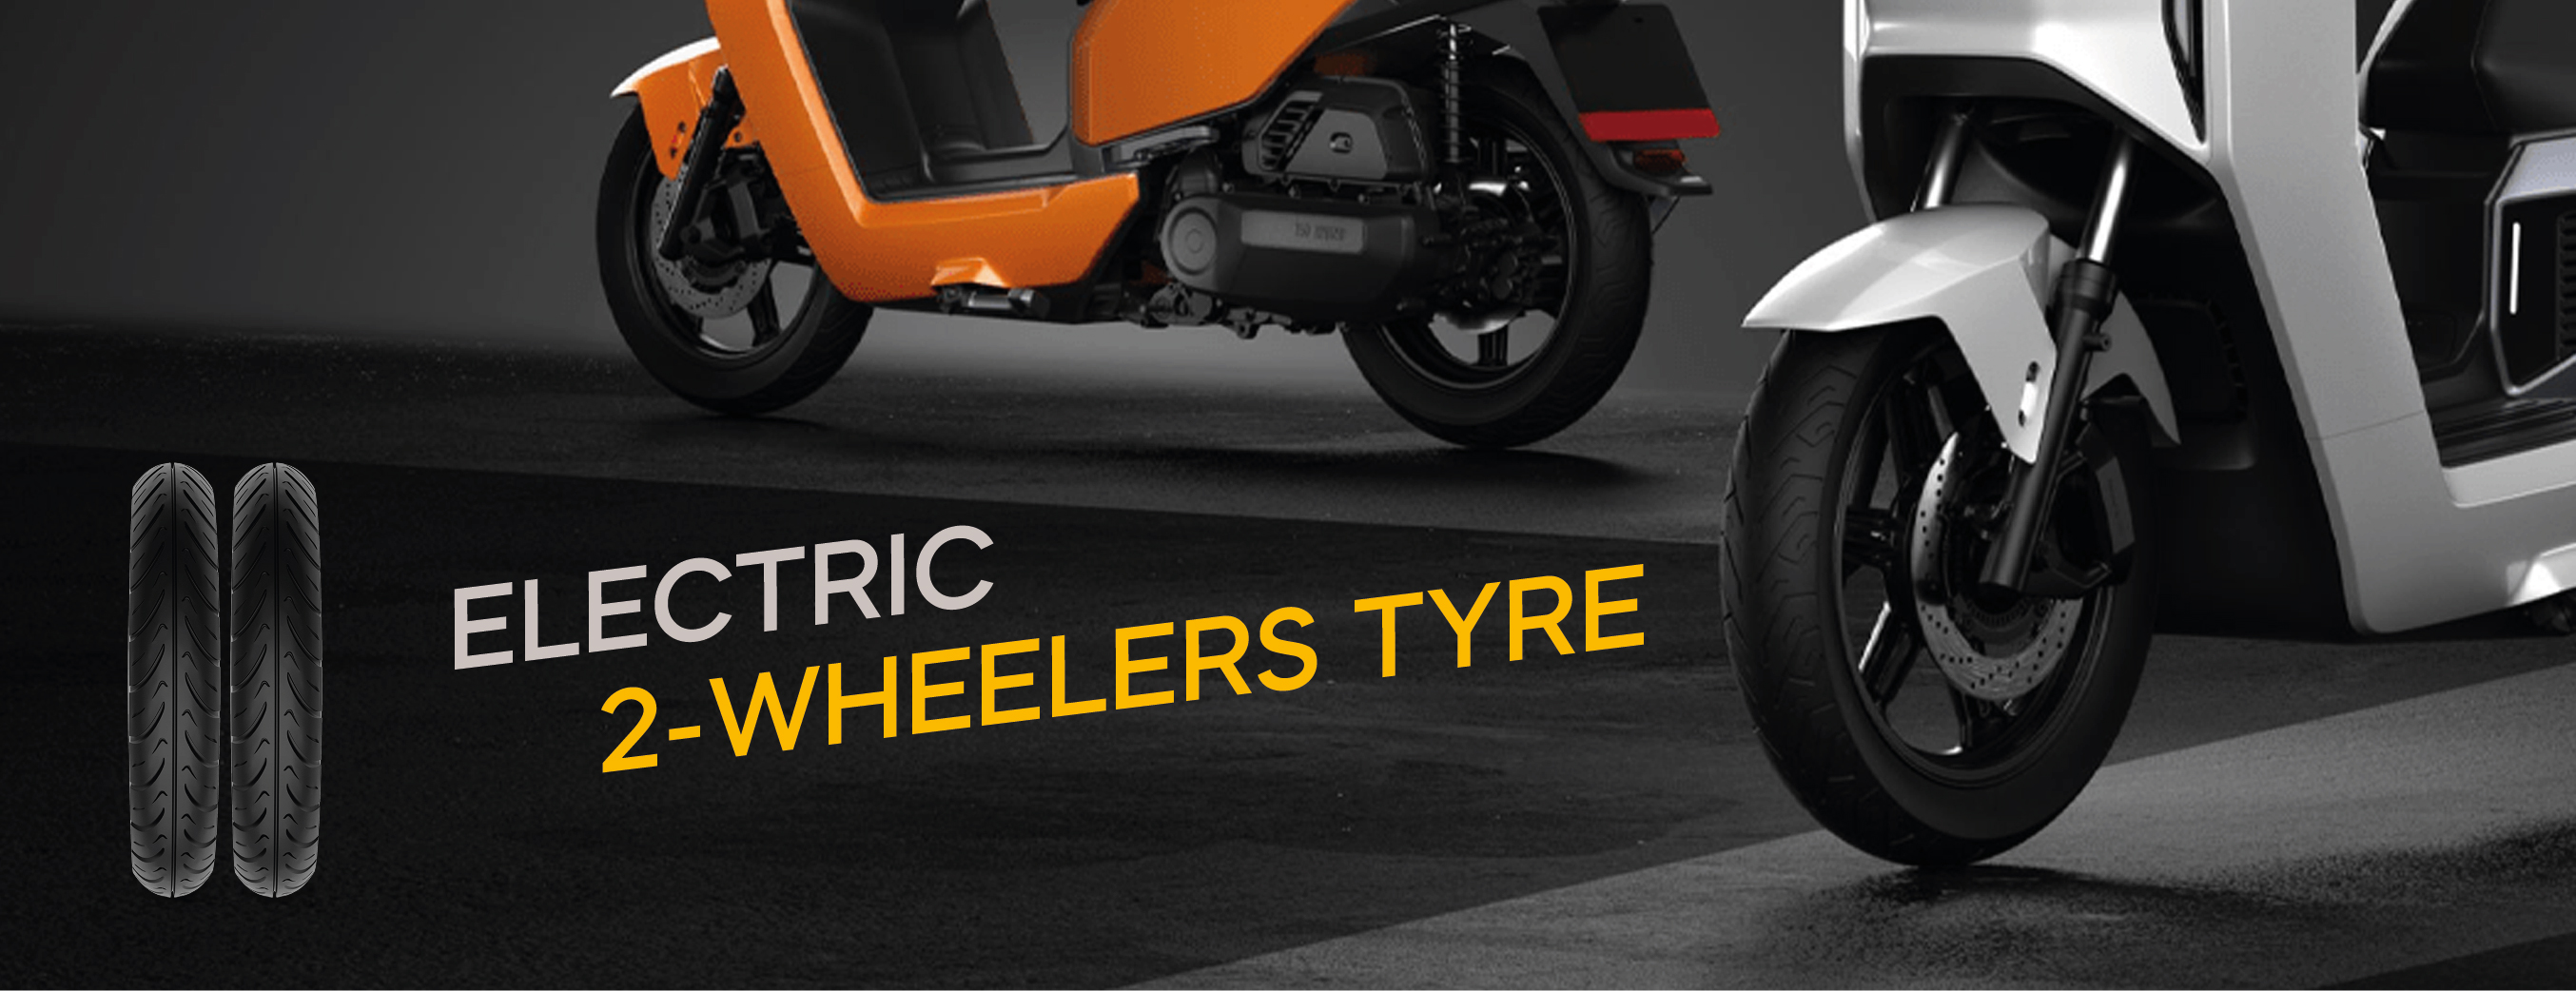 electric 2-wheelers tyre 